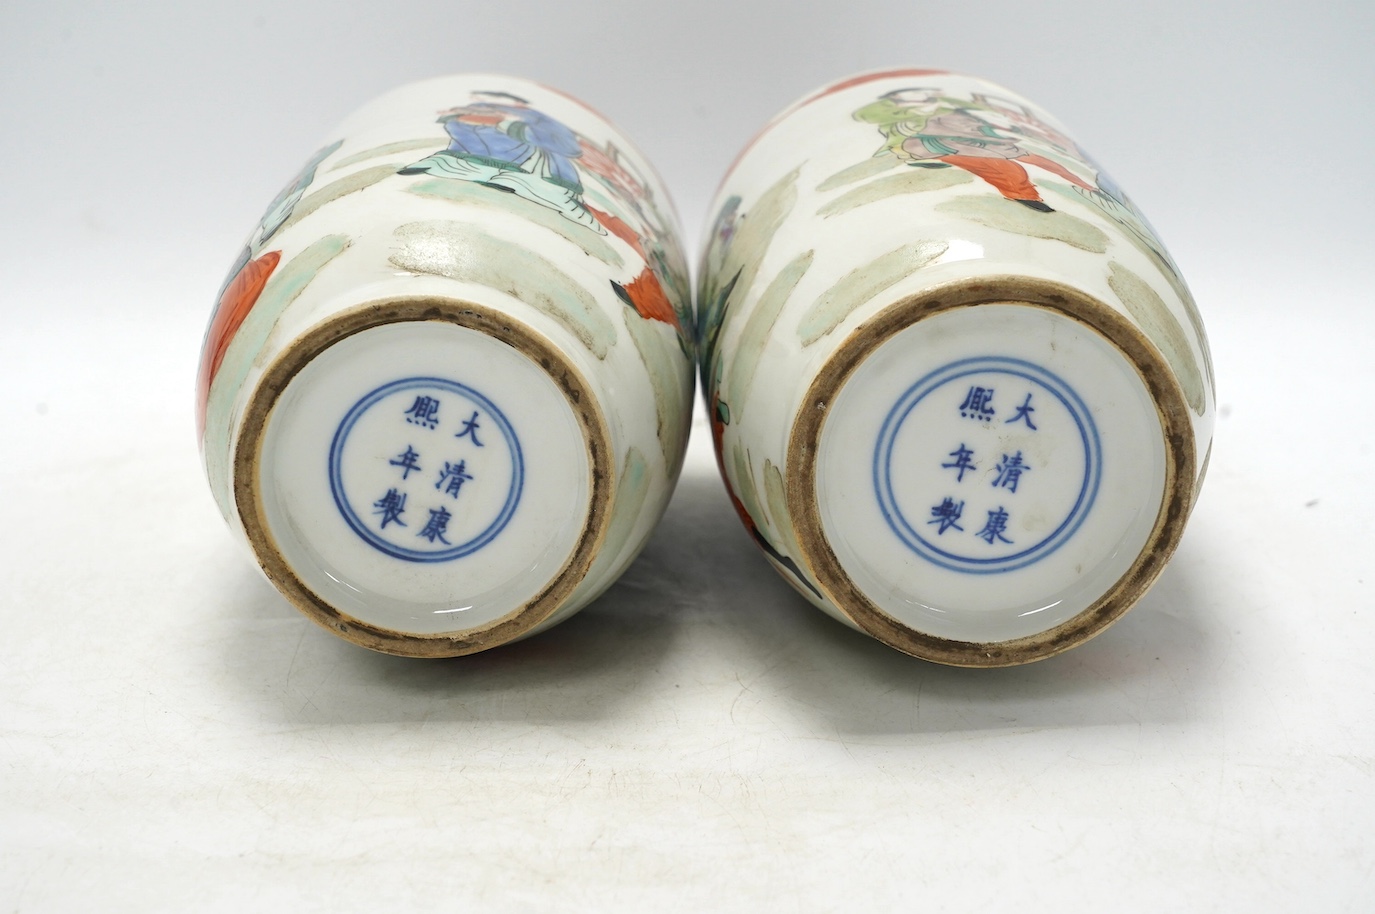 A pair of Chinese famille verte vases, hand painted with figures, 32cm high. Condition - good